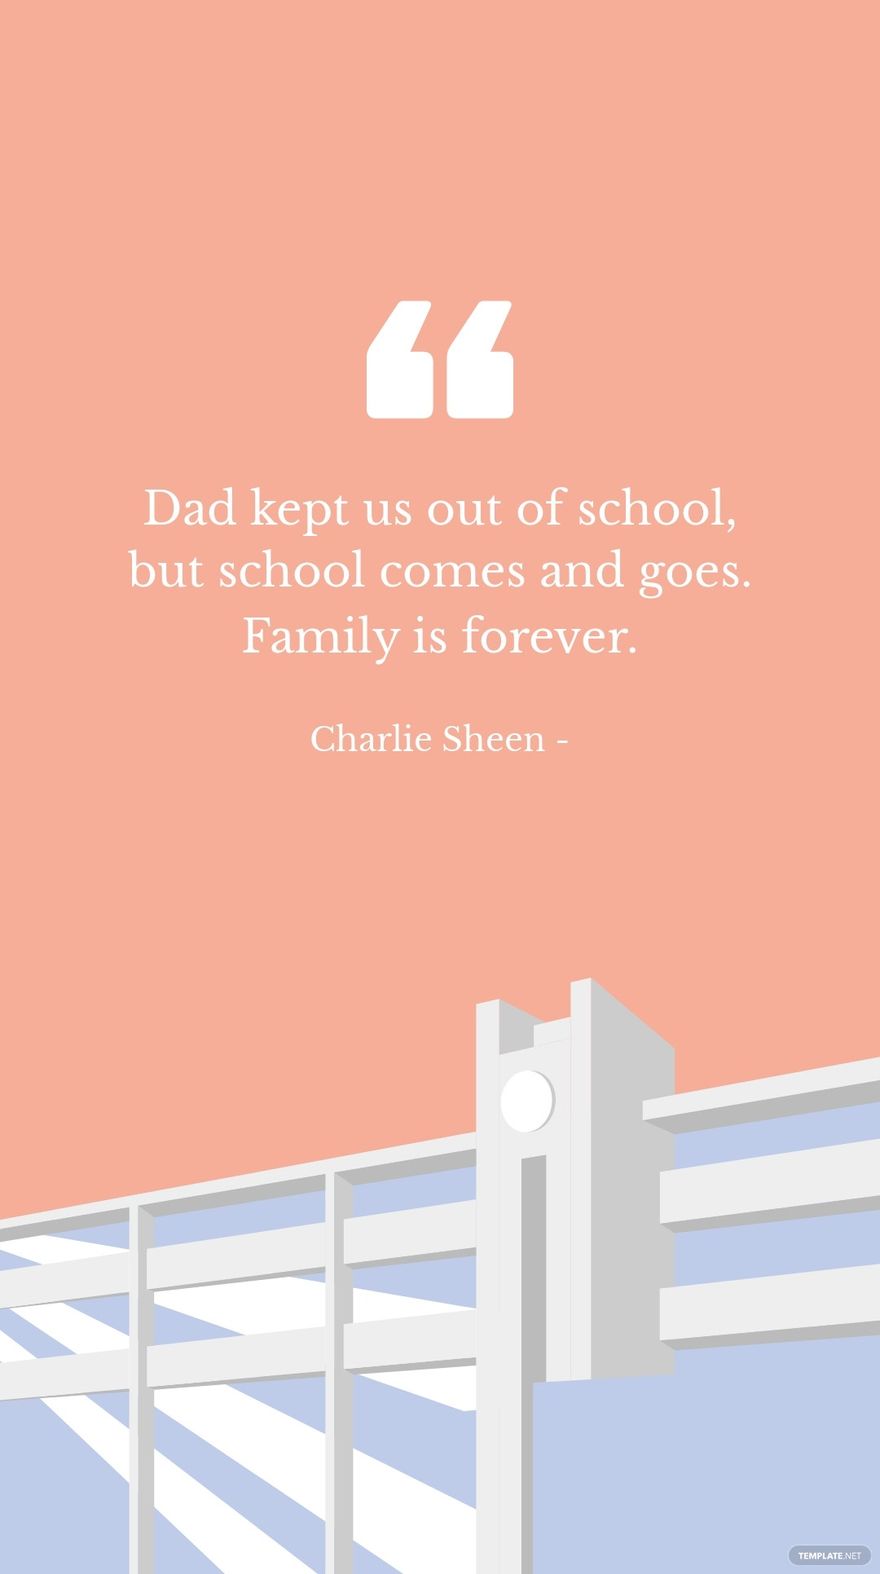 Charlie Sheen - Dad kept us out of school, but school comes and goes. Family is forever.